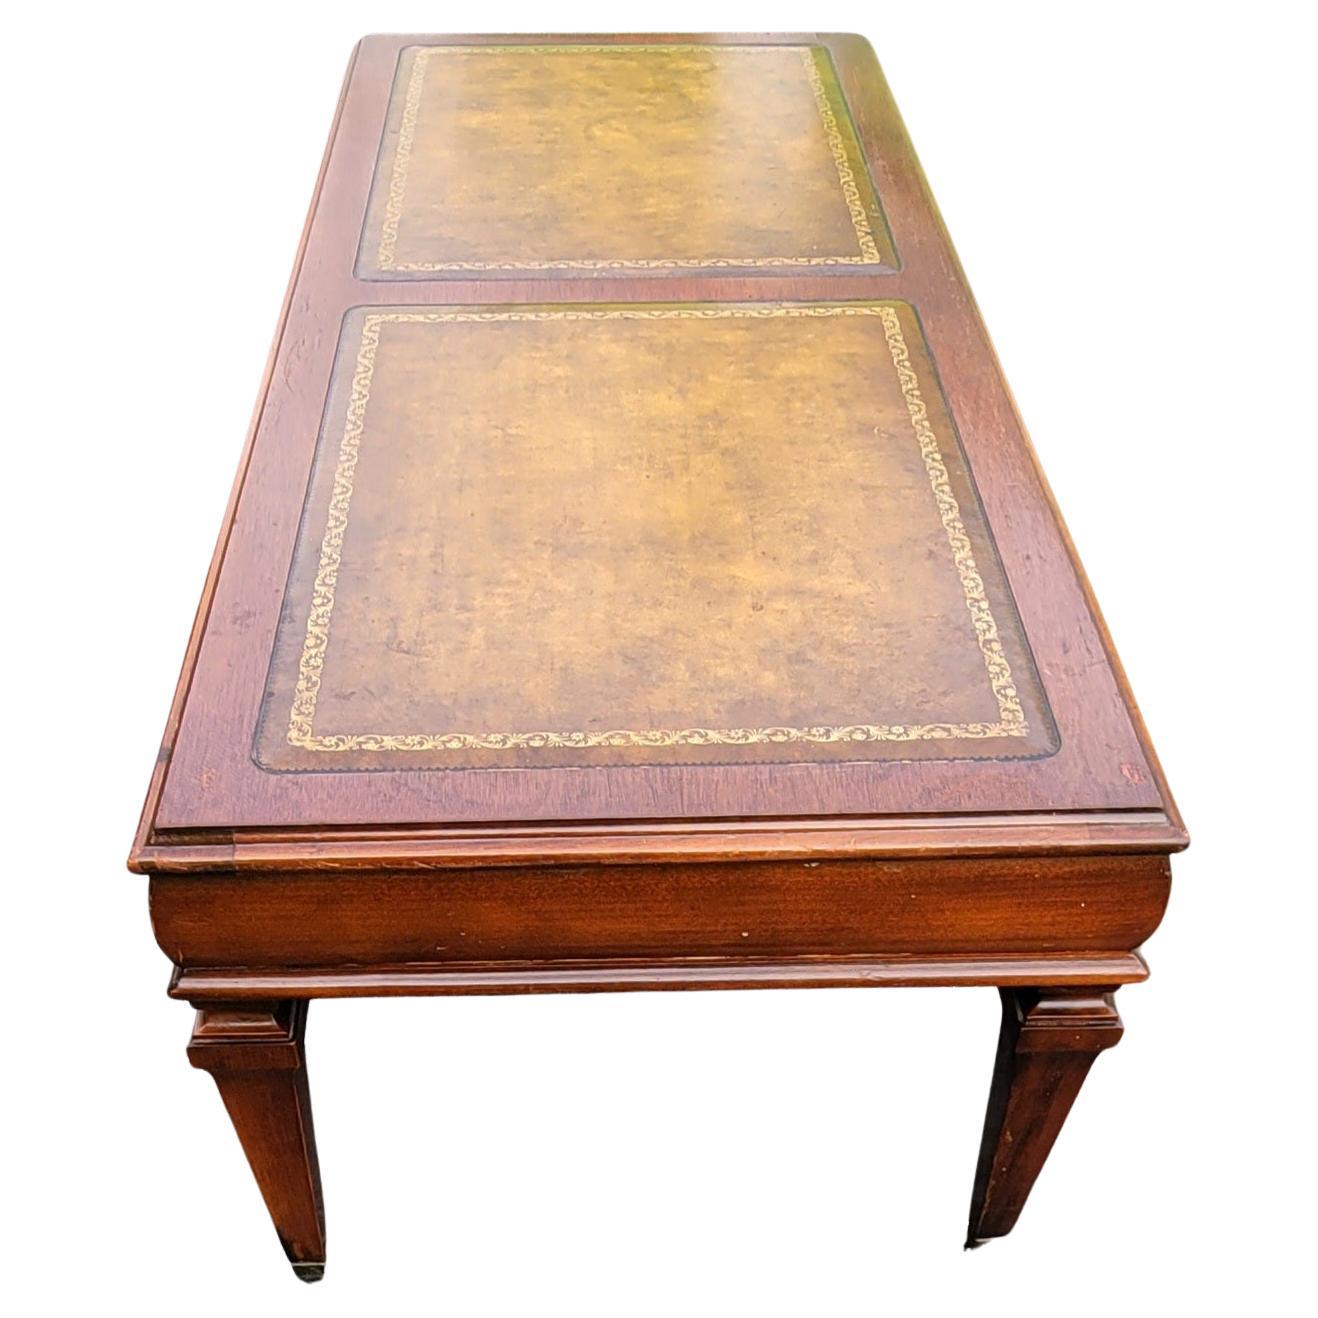 Woodwork 1961 Mahogany and Stenciled Tooled Leather Paneled Top Cocktail Table For Sale